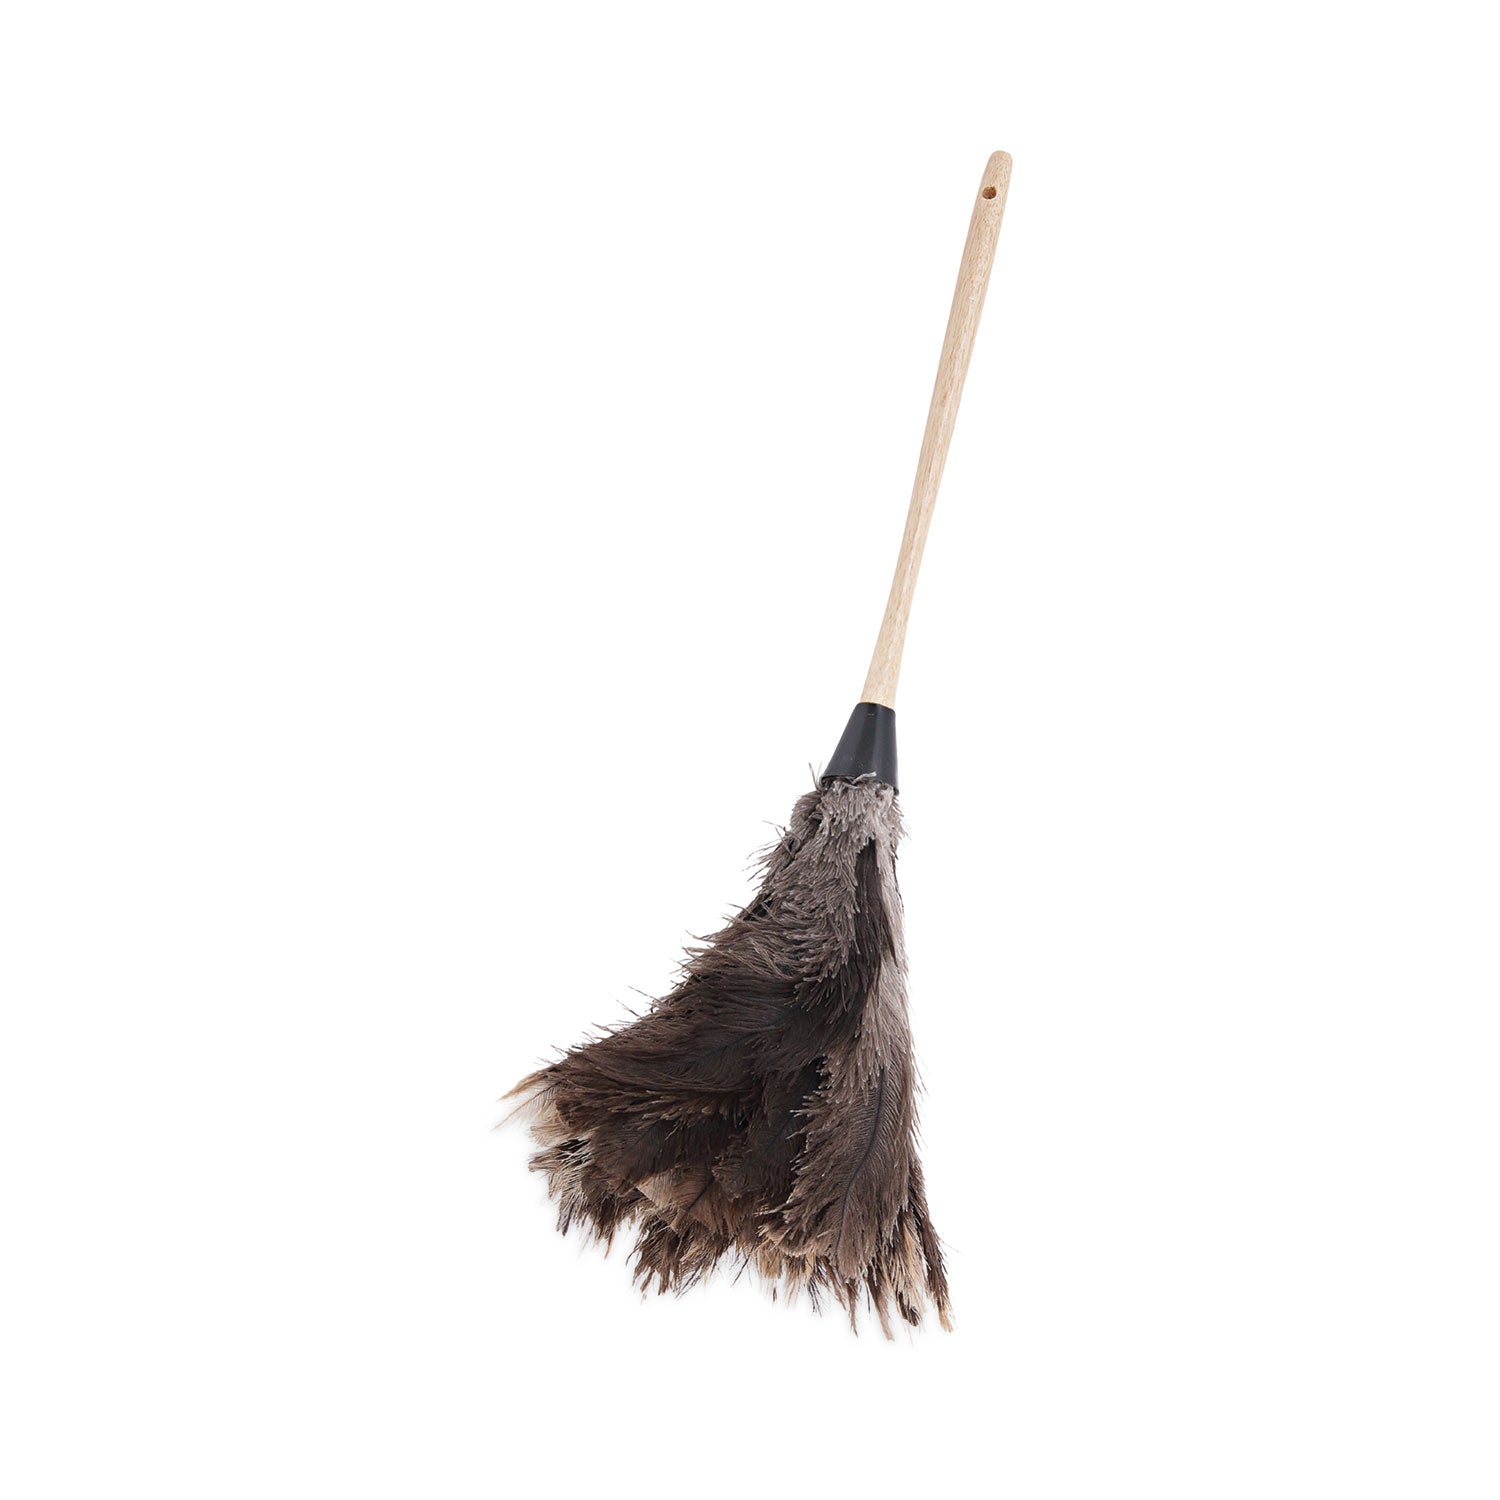 professional-ostrich-feather-duster-13-handle_bwk23fd - 1